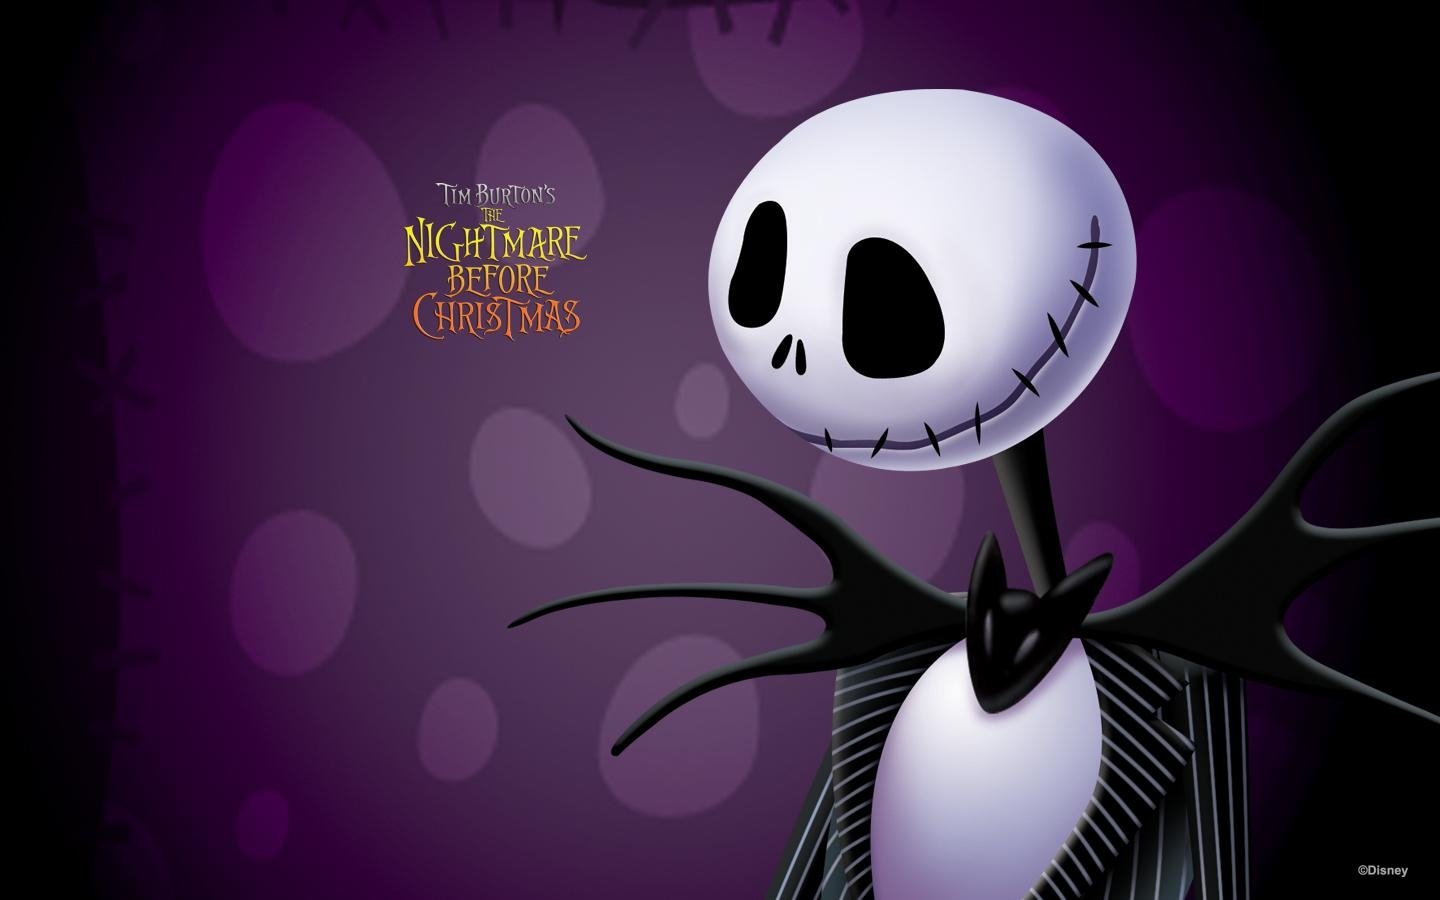 Explore more Nightmare Before Christmas wallpapers